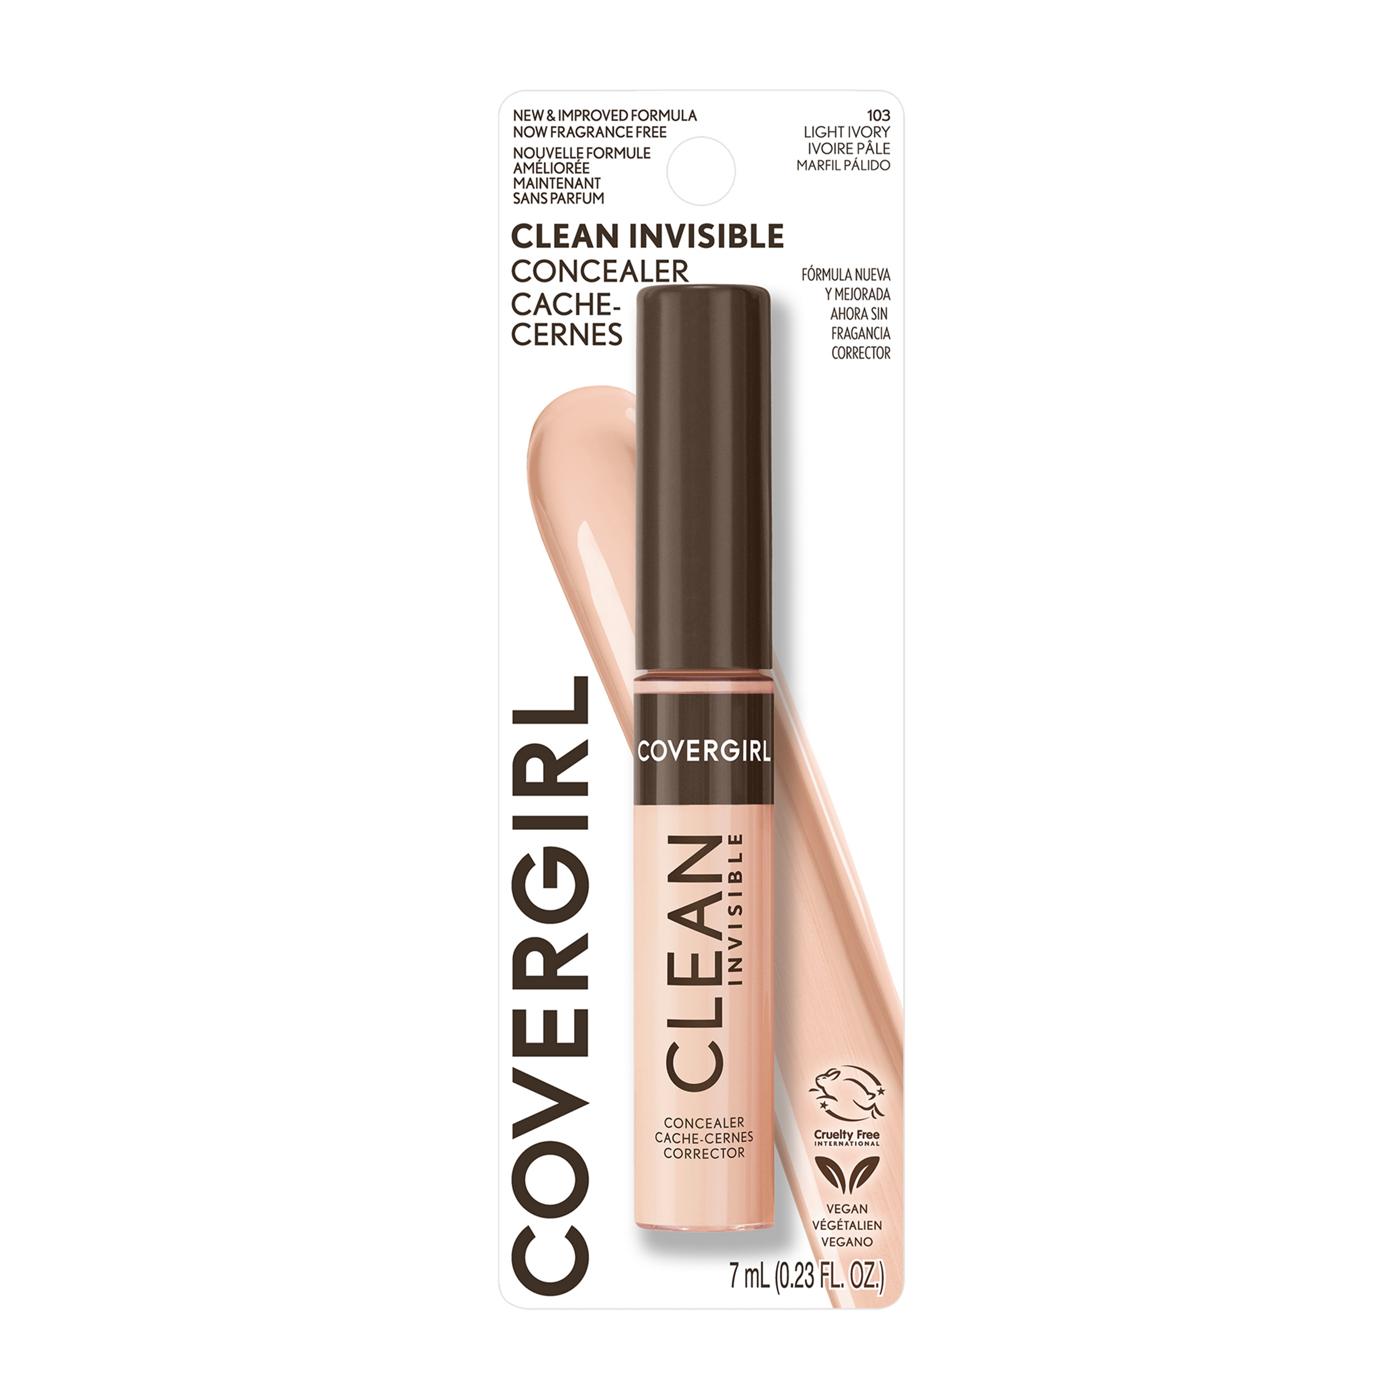 Covergirl Clean Invisible Concealer - Light Ivory; image 1 of 15